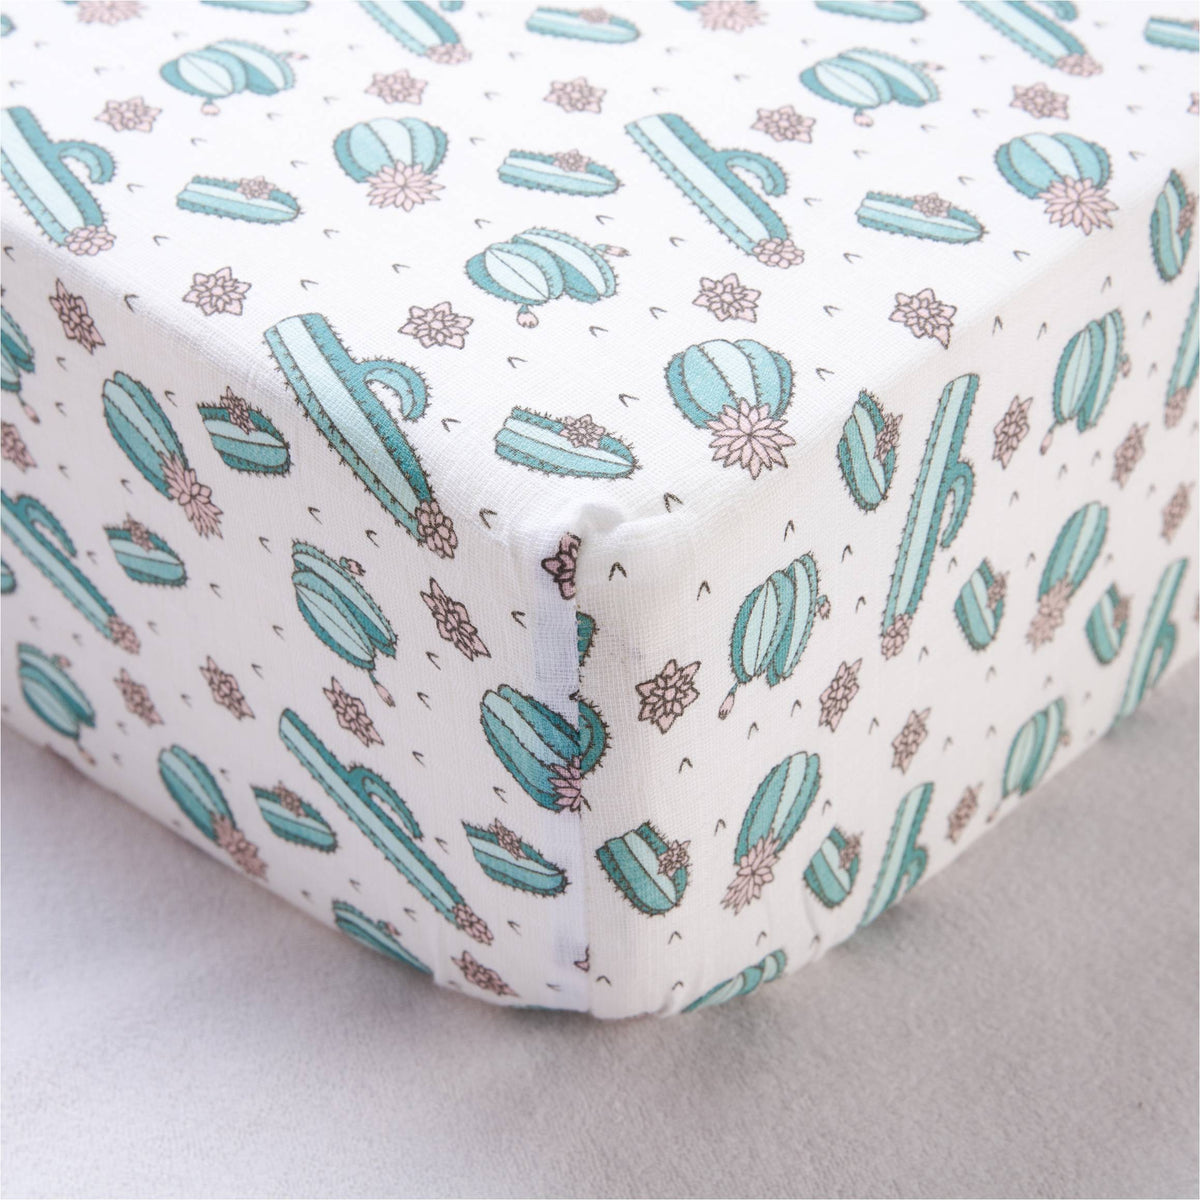 Cotton Muslin Crib Sheet Fitted (Cactus)